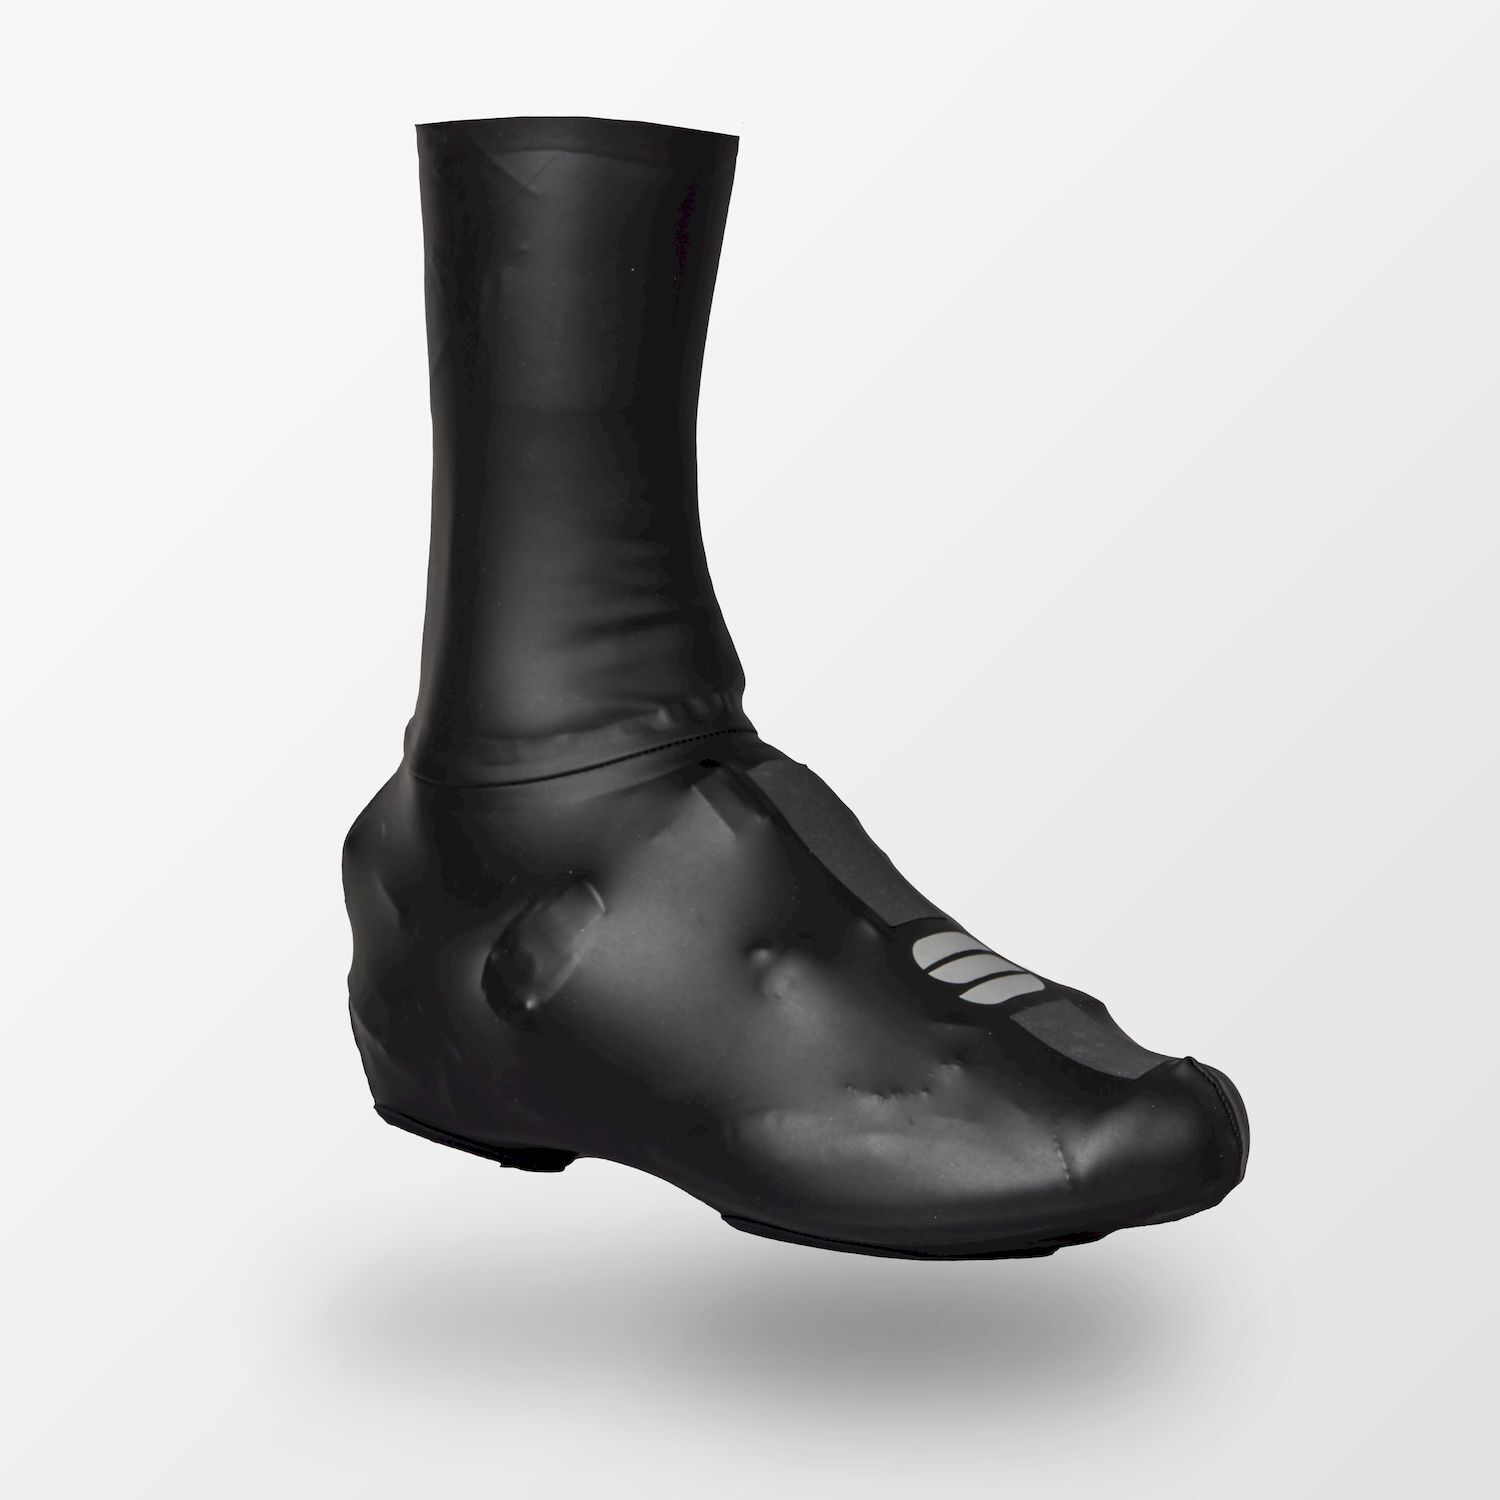 Sportful Speed Skin Silicone Bootie - Cycling overshoes